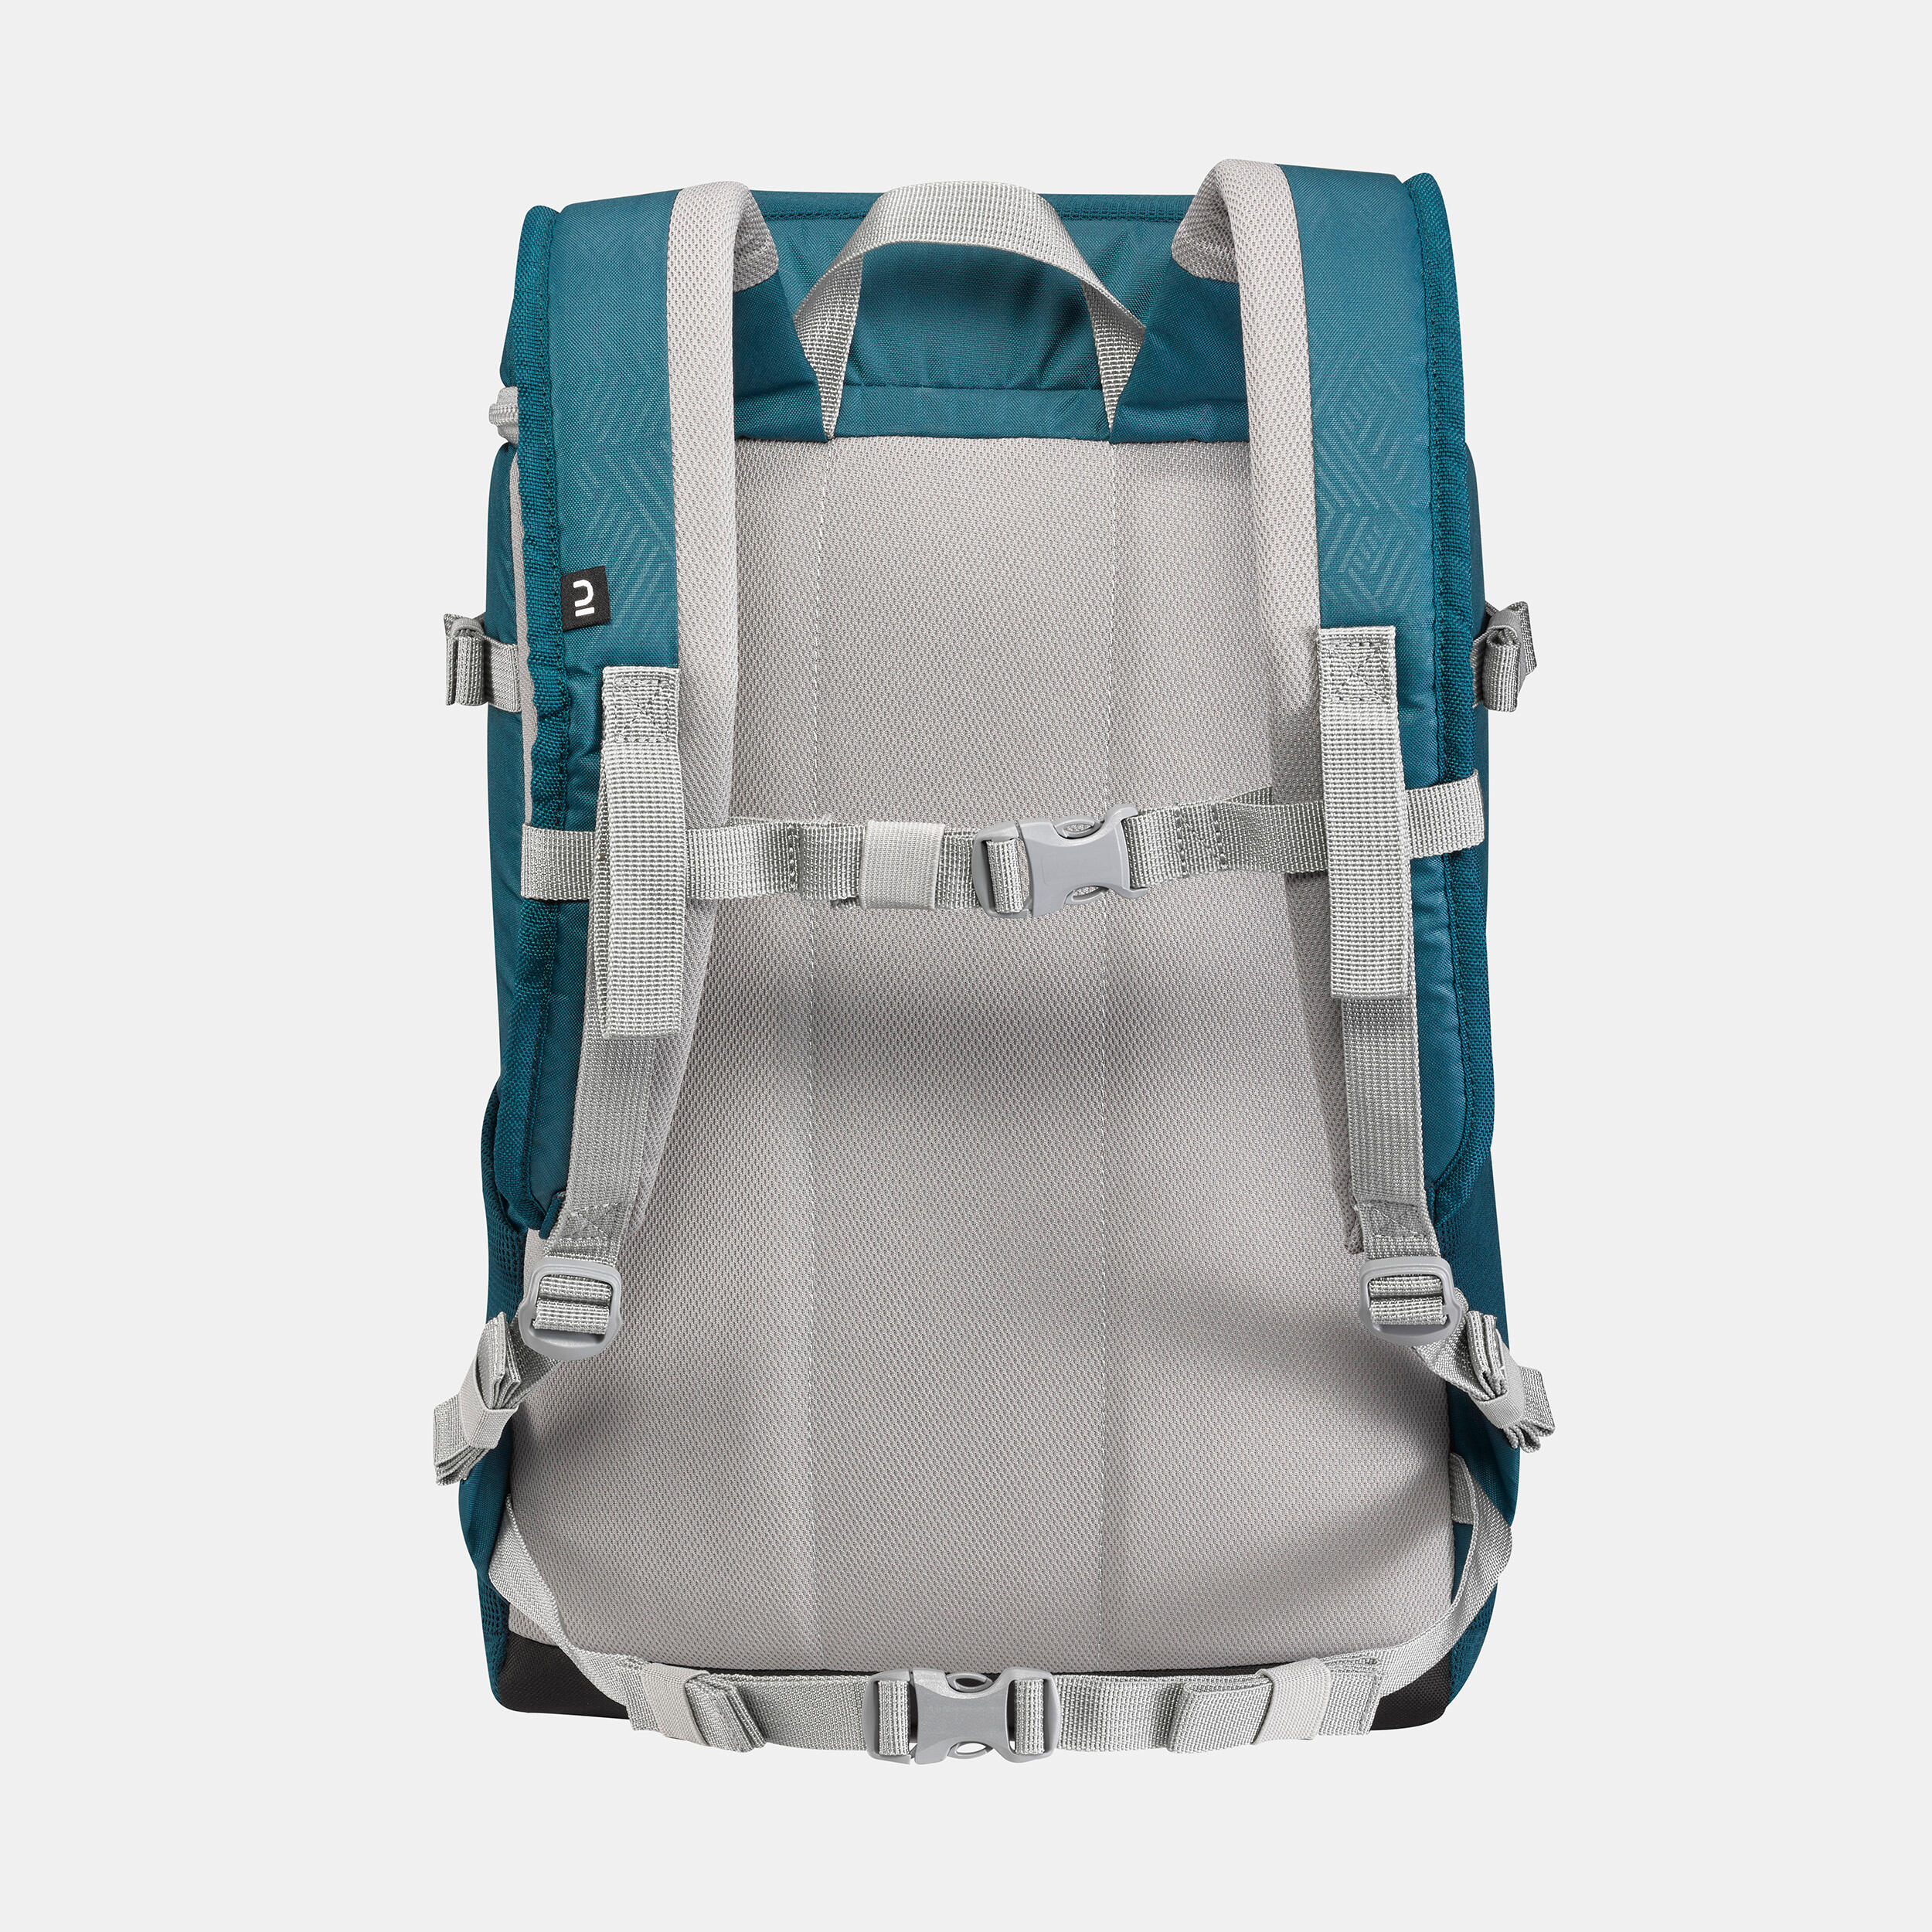 NH 100 Ice Compact Isothermal Backpack 20 L - QUECHUA